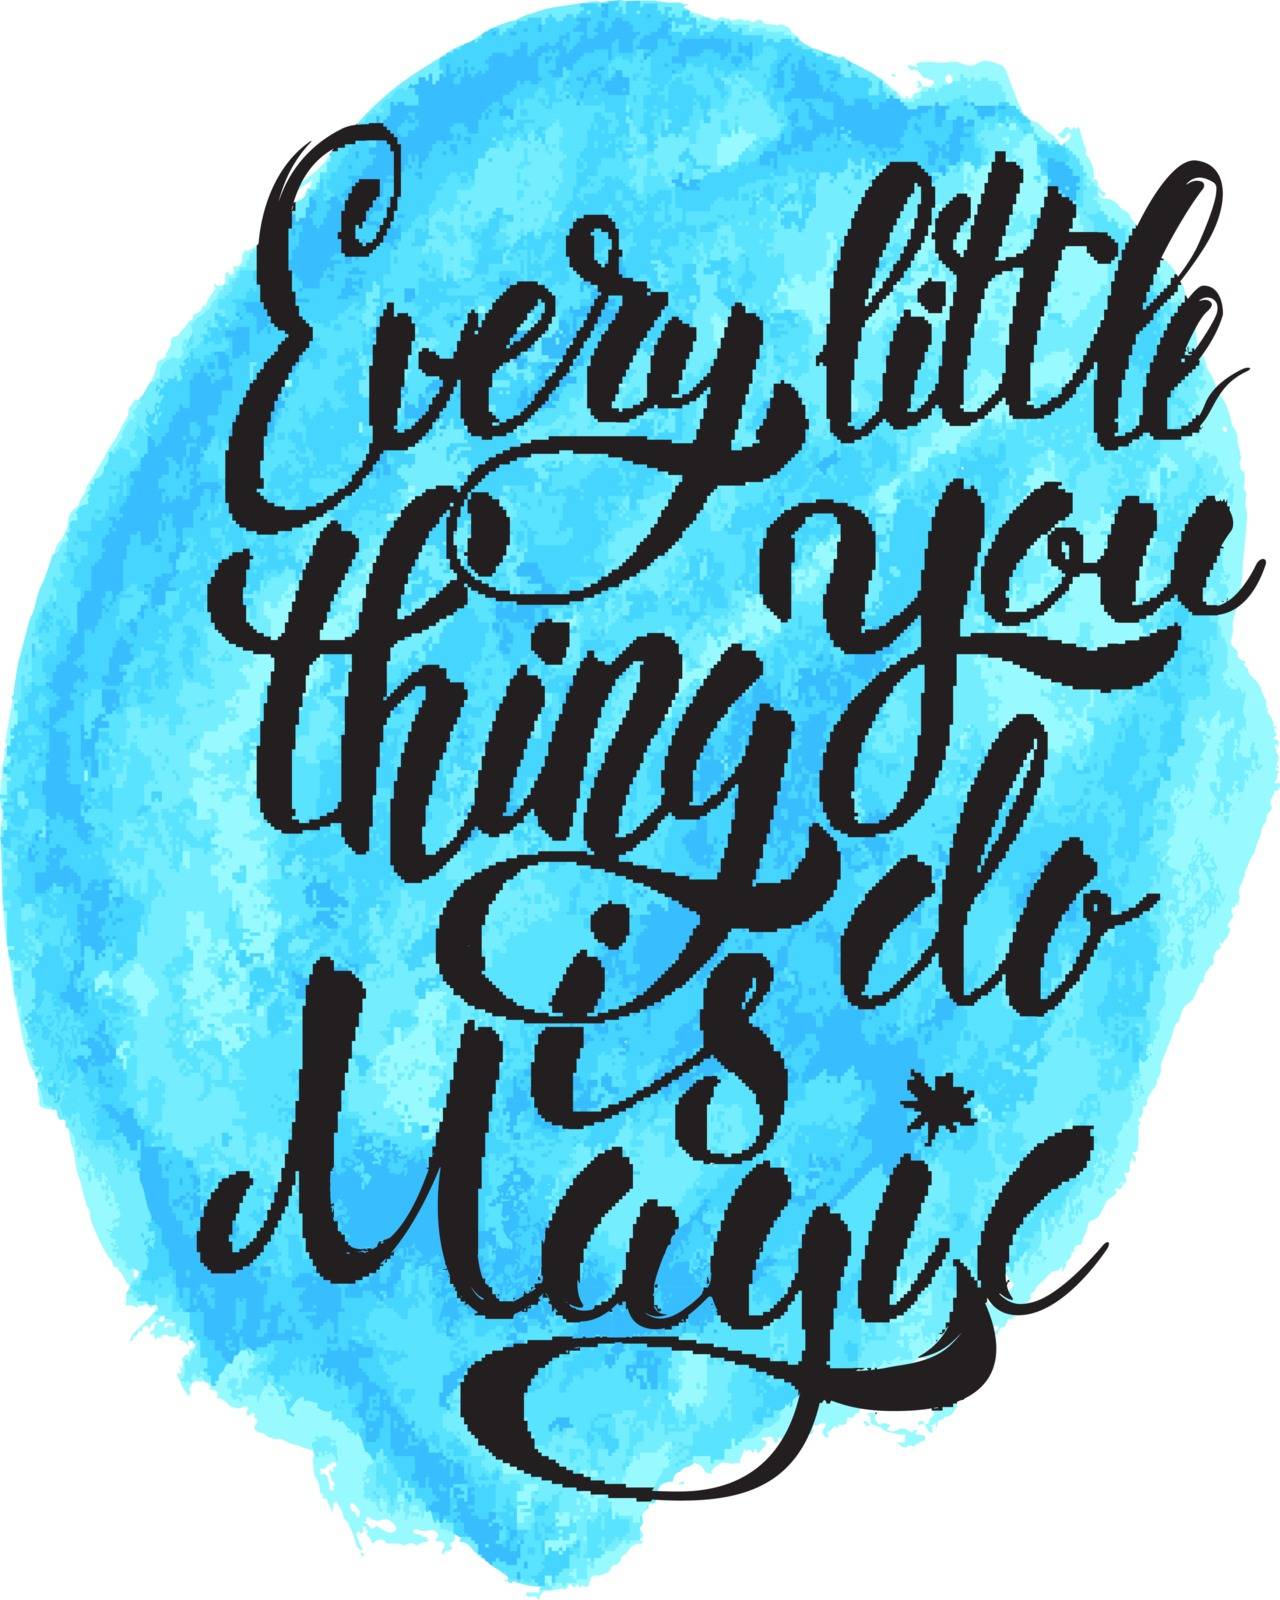 Every Little Thing You Do Is Magic. Hand drawn lettering isolated on white background with aquarelle stain. Design element for poster, greeting card. Vector illustration.